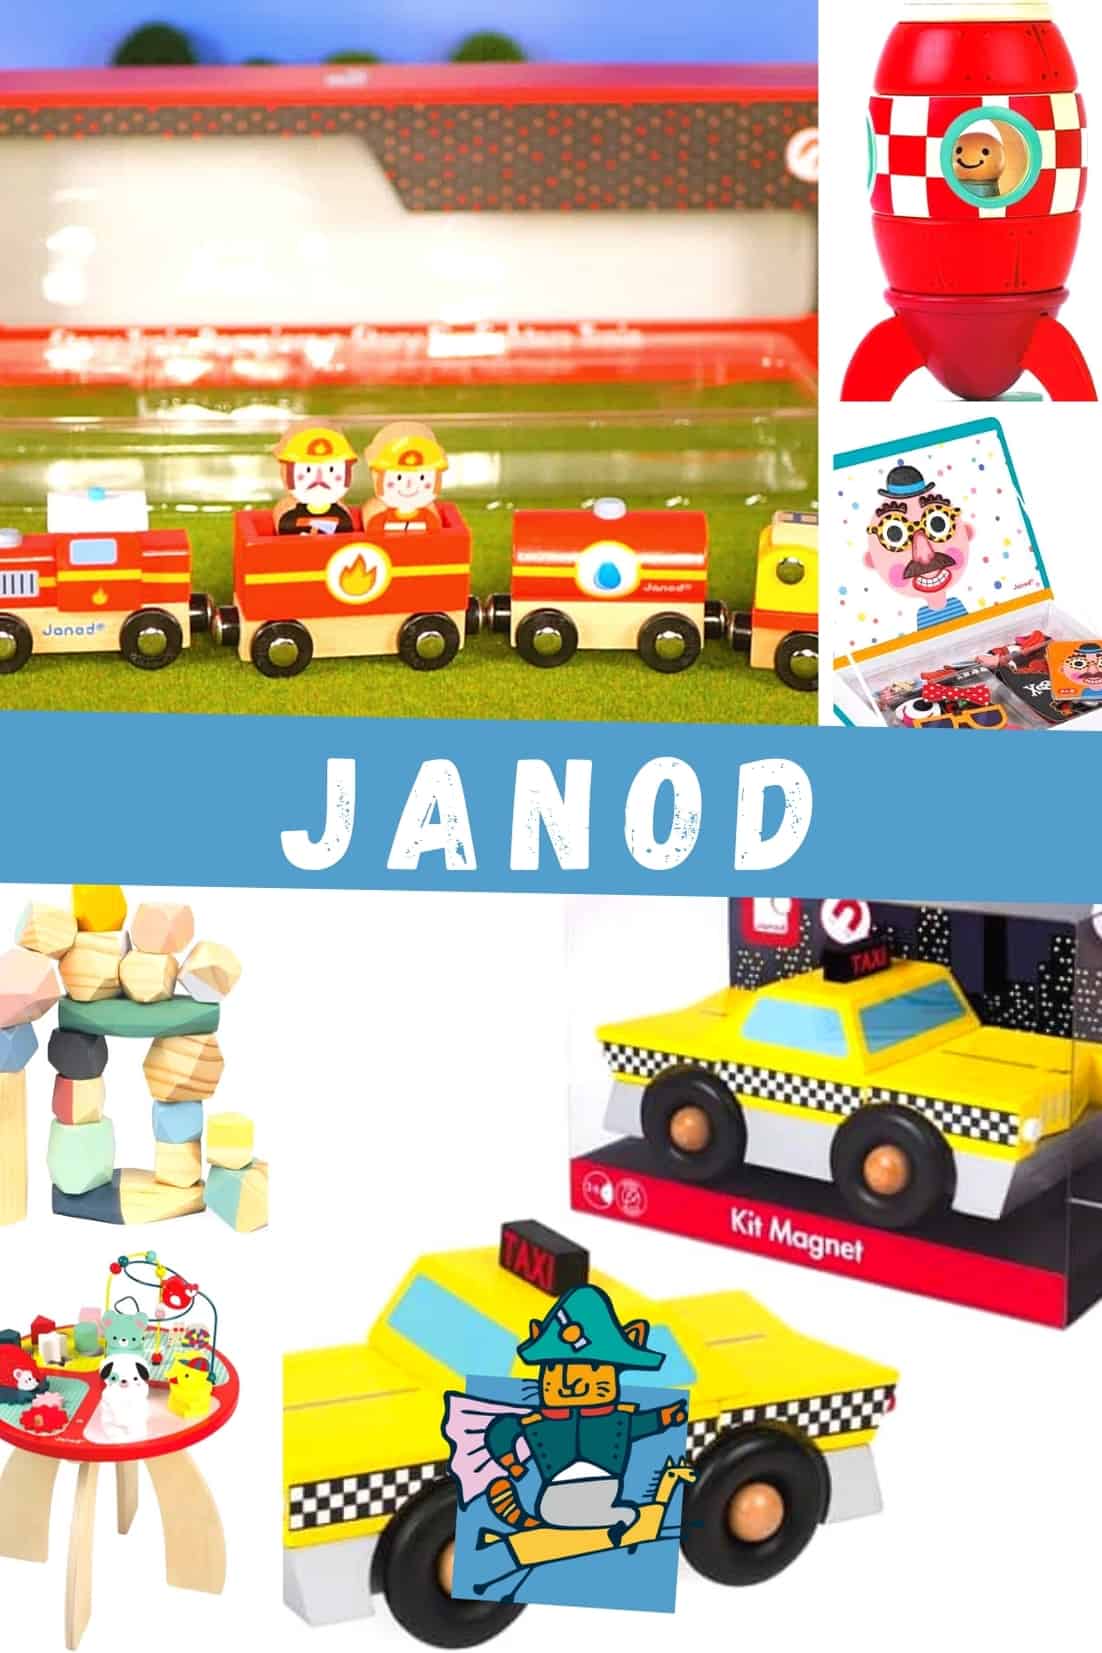 Janod wooden toys